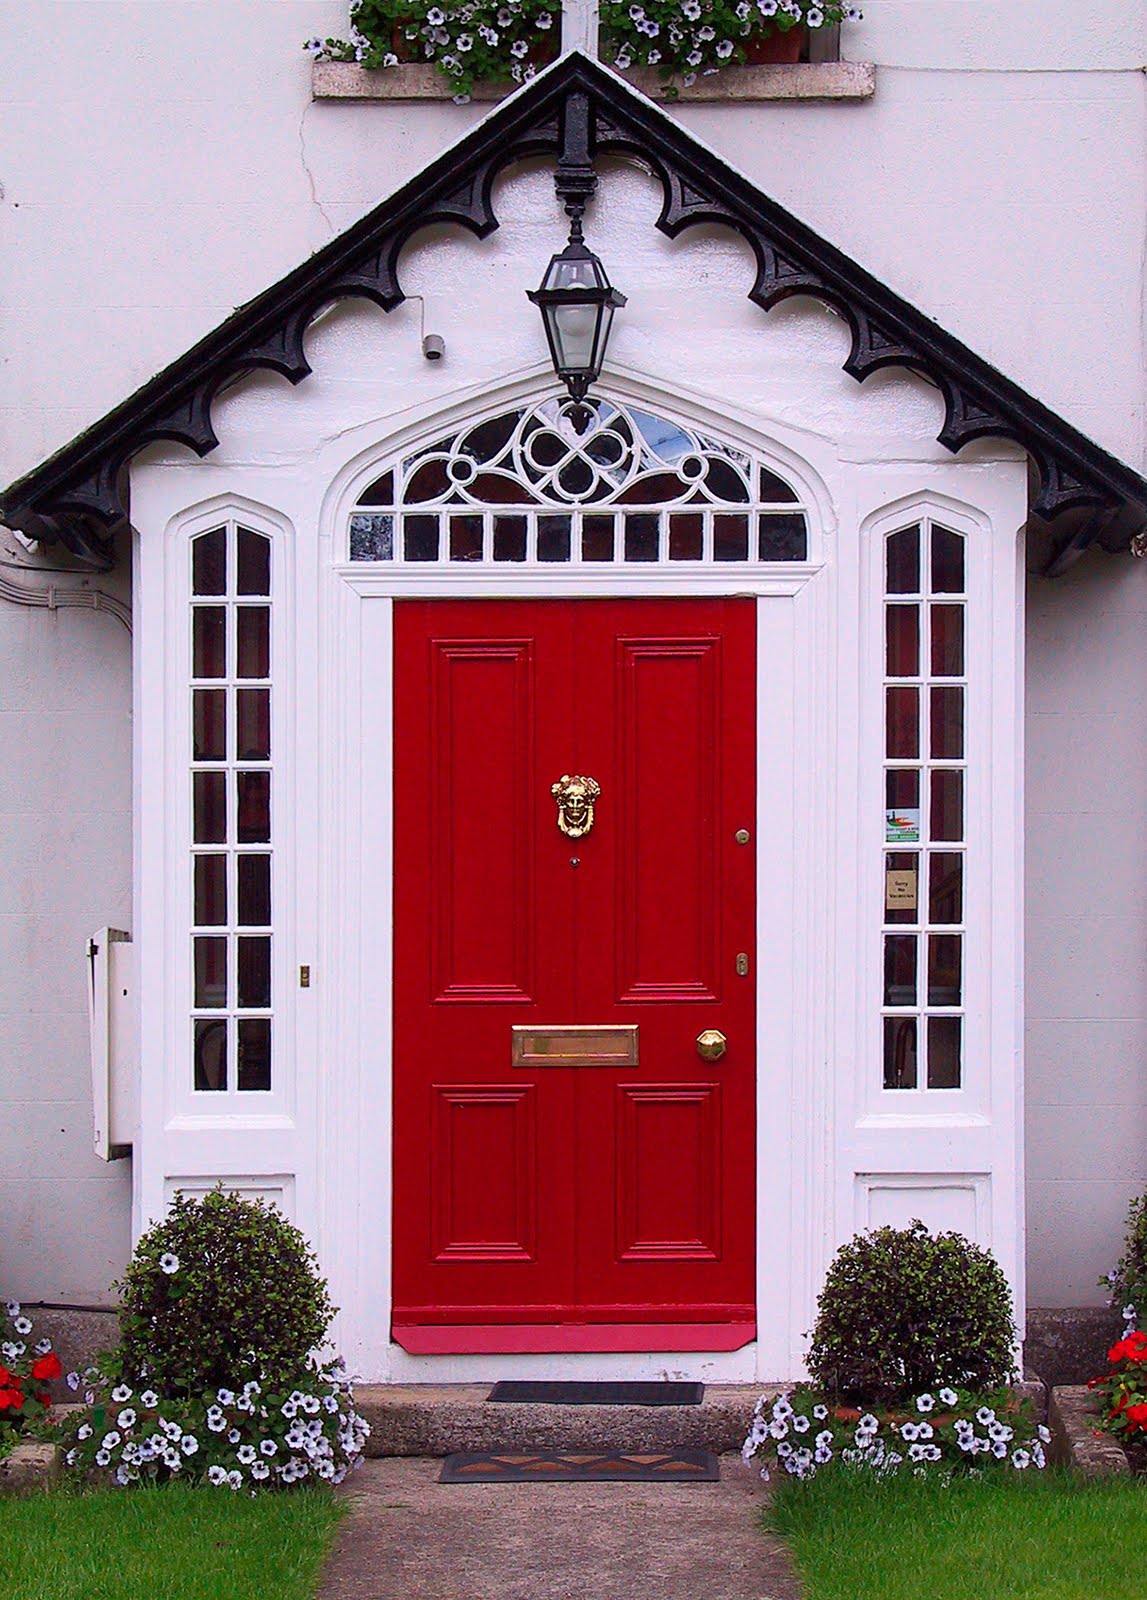 A-charming-house-in-light-shade-of-pink-with-a-red-door-